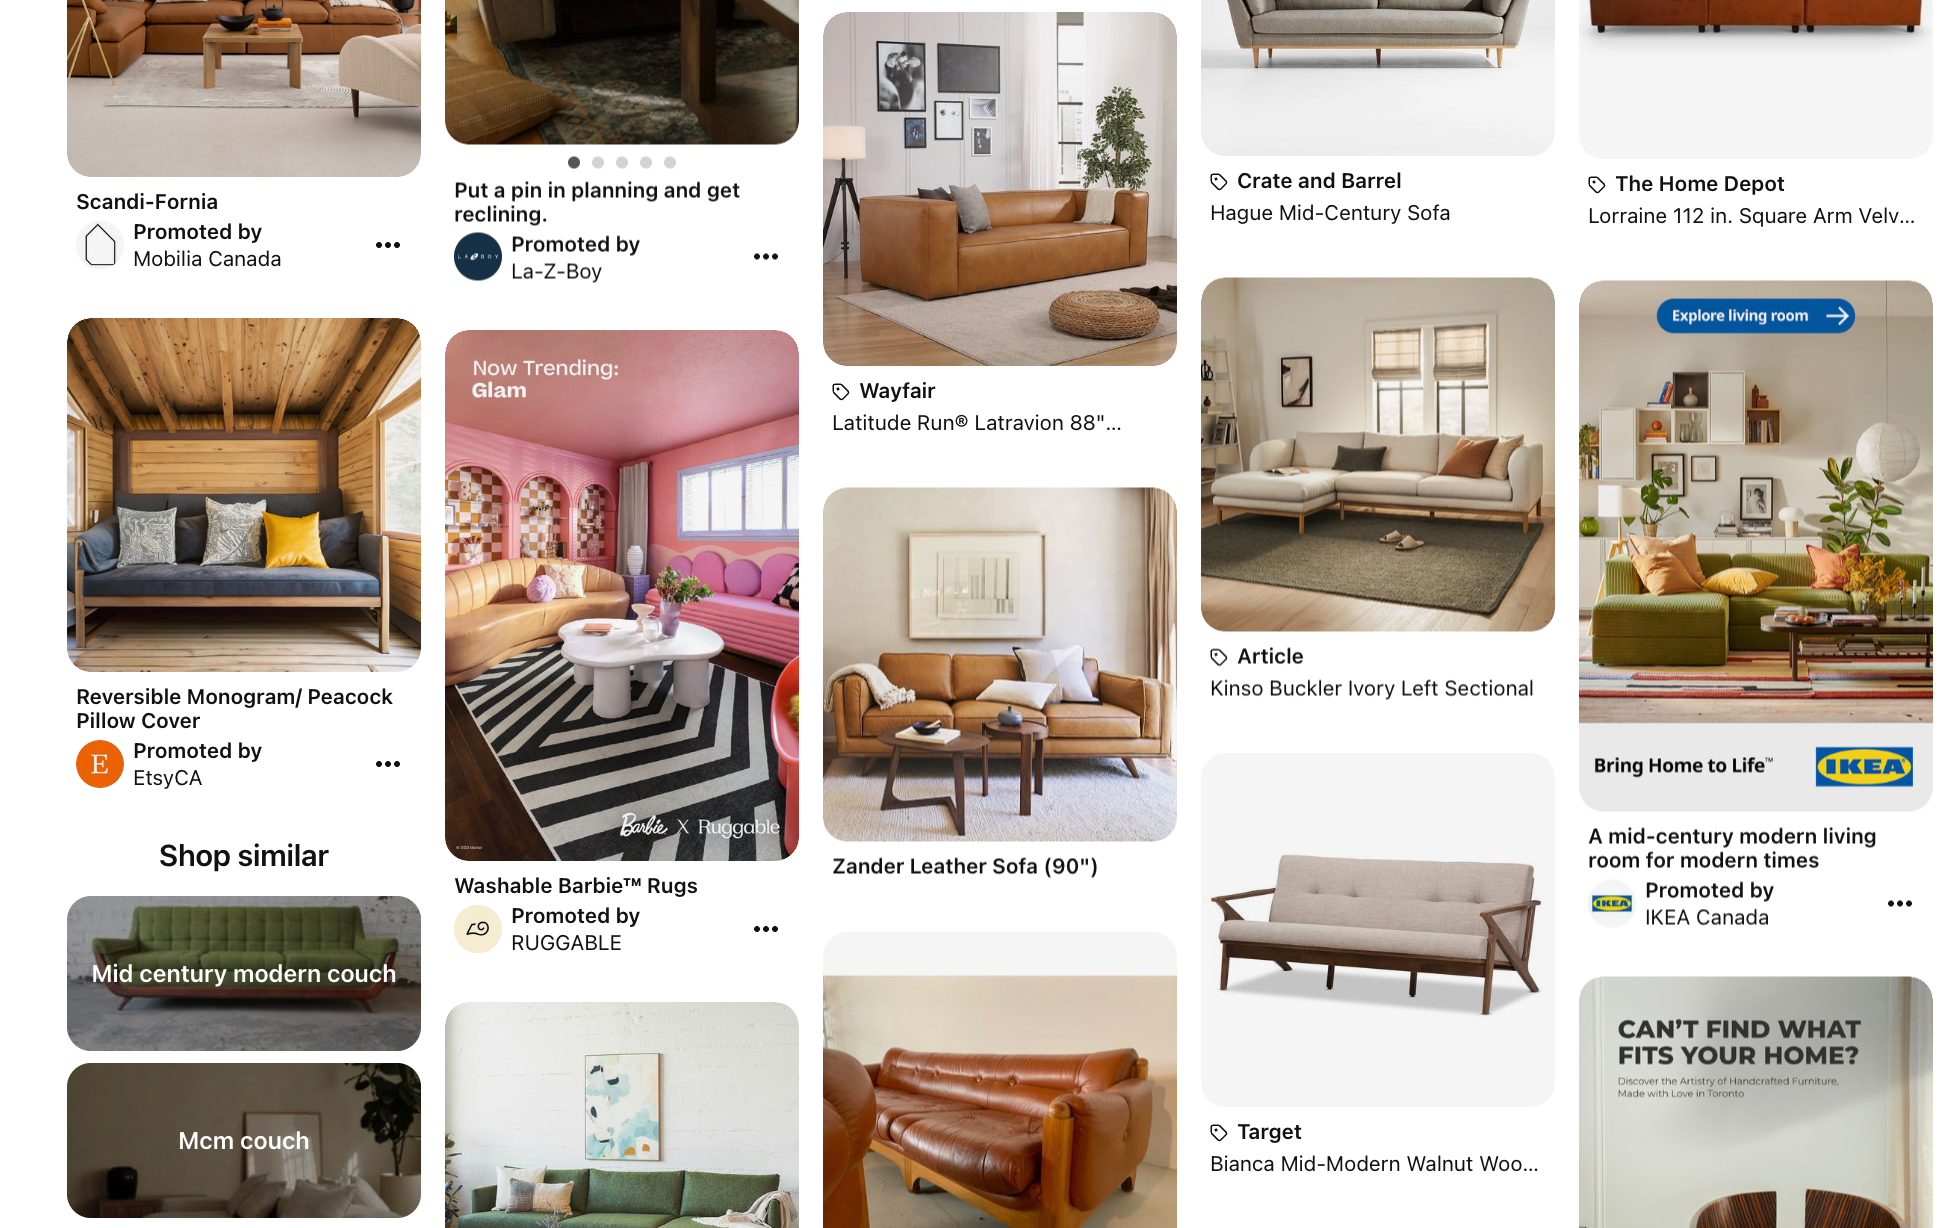 Pinterest search results showing ads